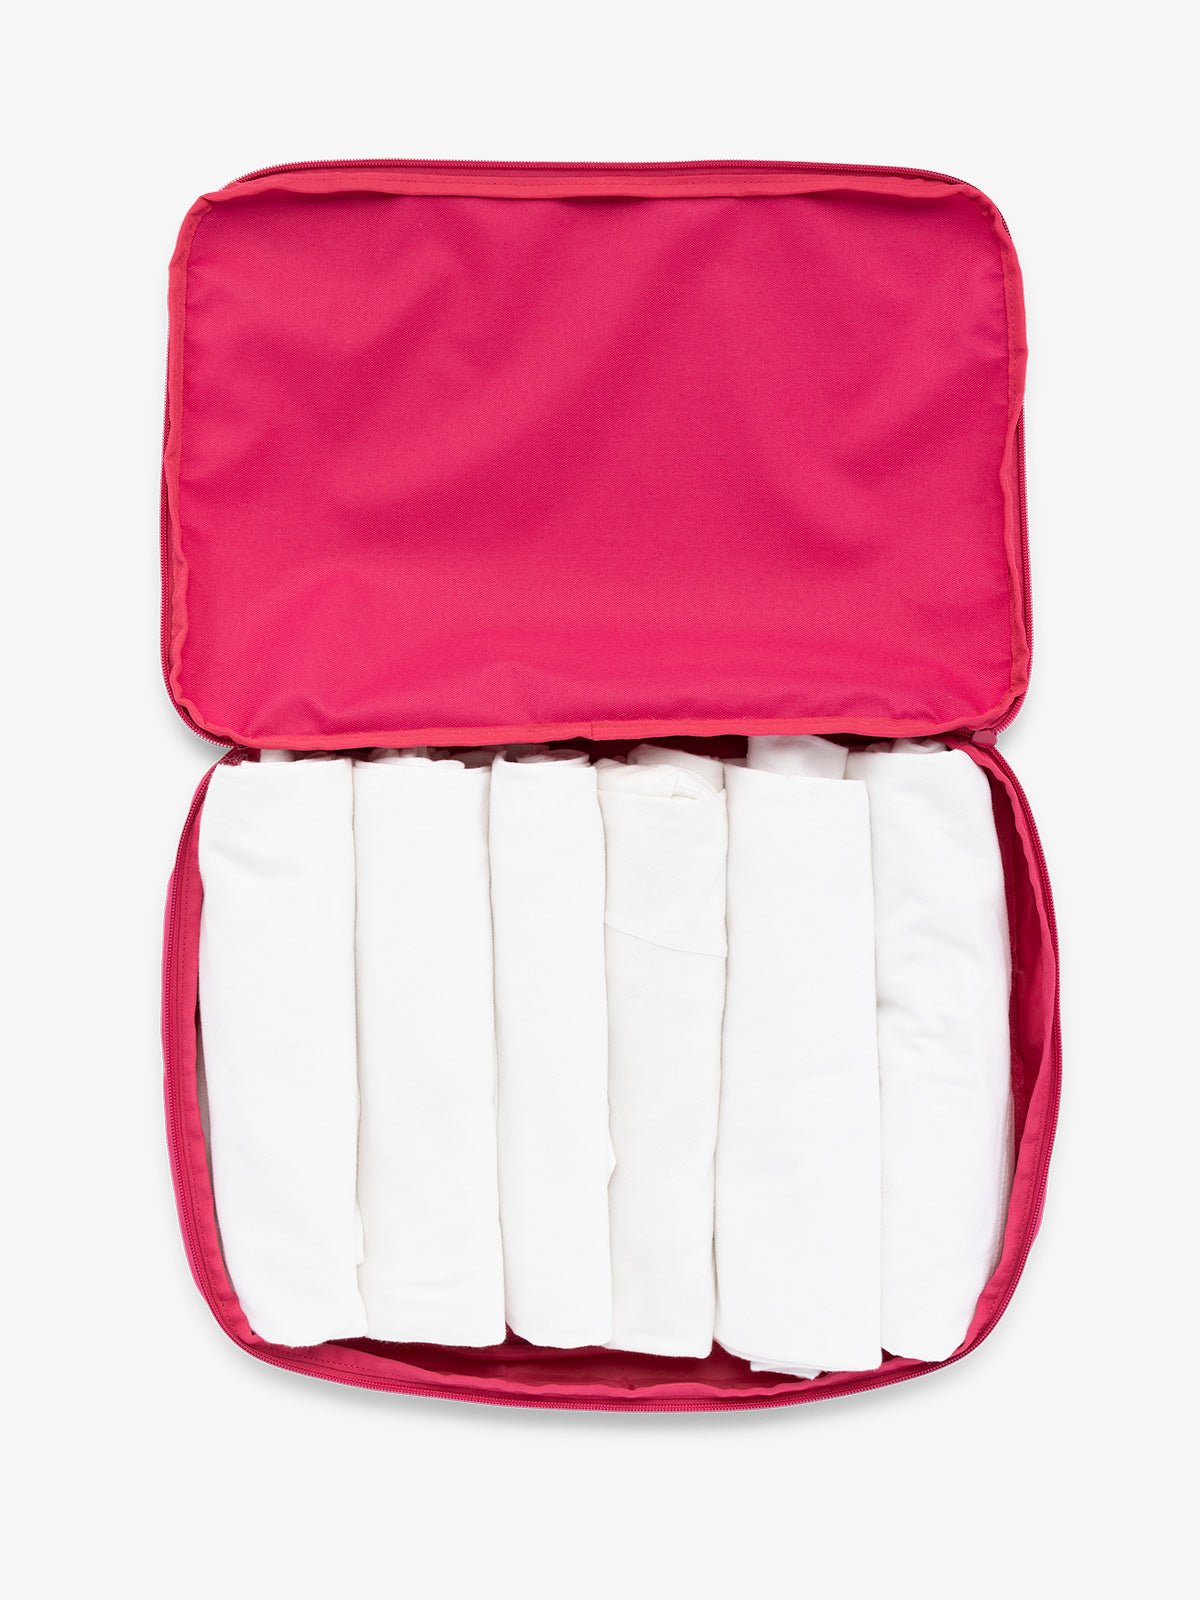 CALPAK large packing cubes for travel made with durable material in dragonfruit